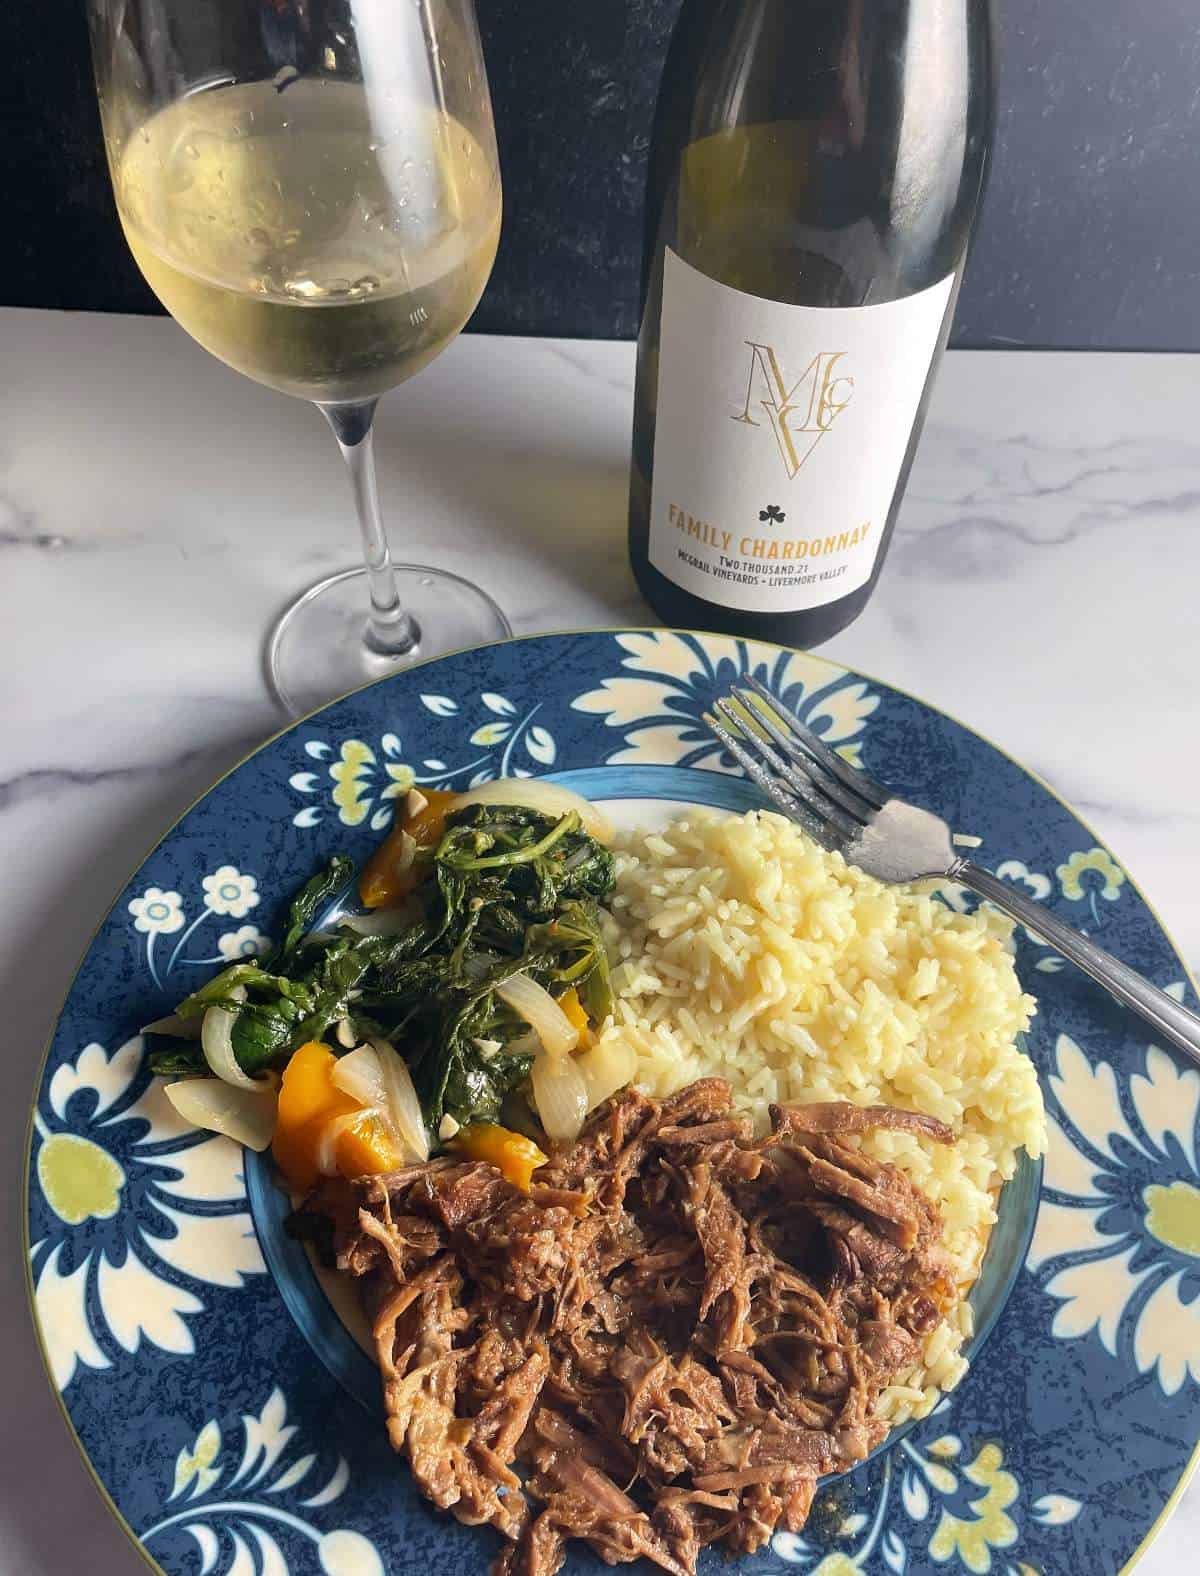 a plate with pulled pork, rice and sautéed greens, with a bottle and glass of Chardonnay white wine in the background.